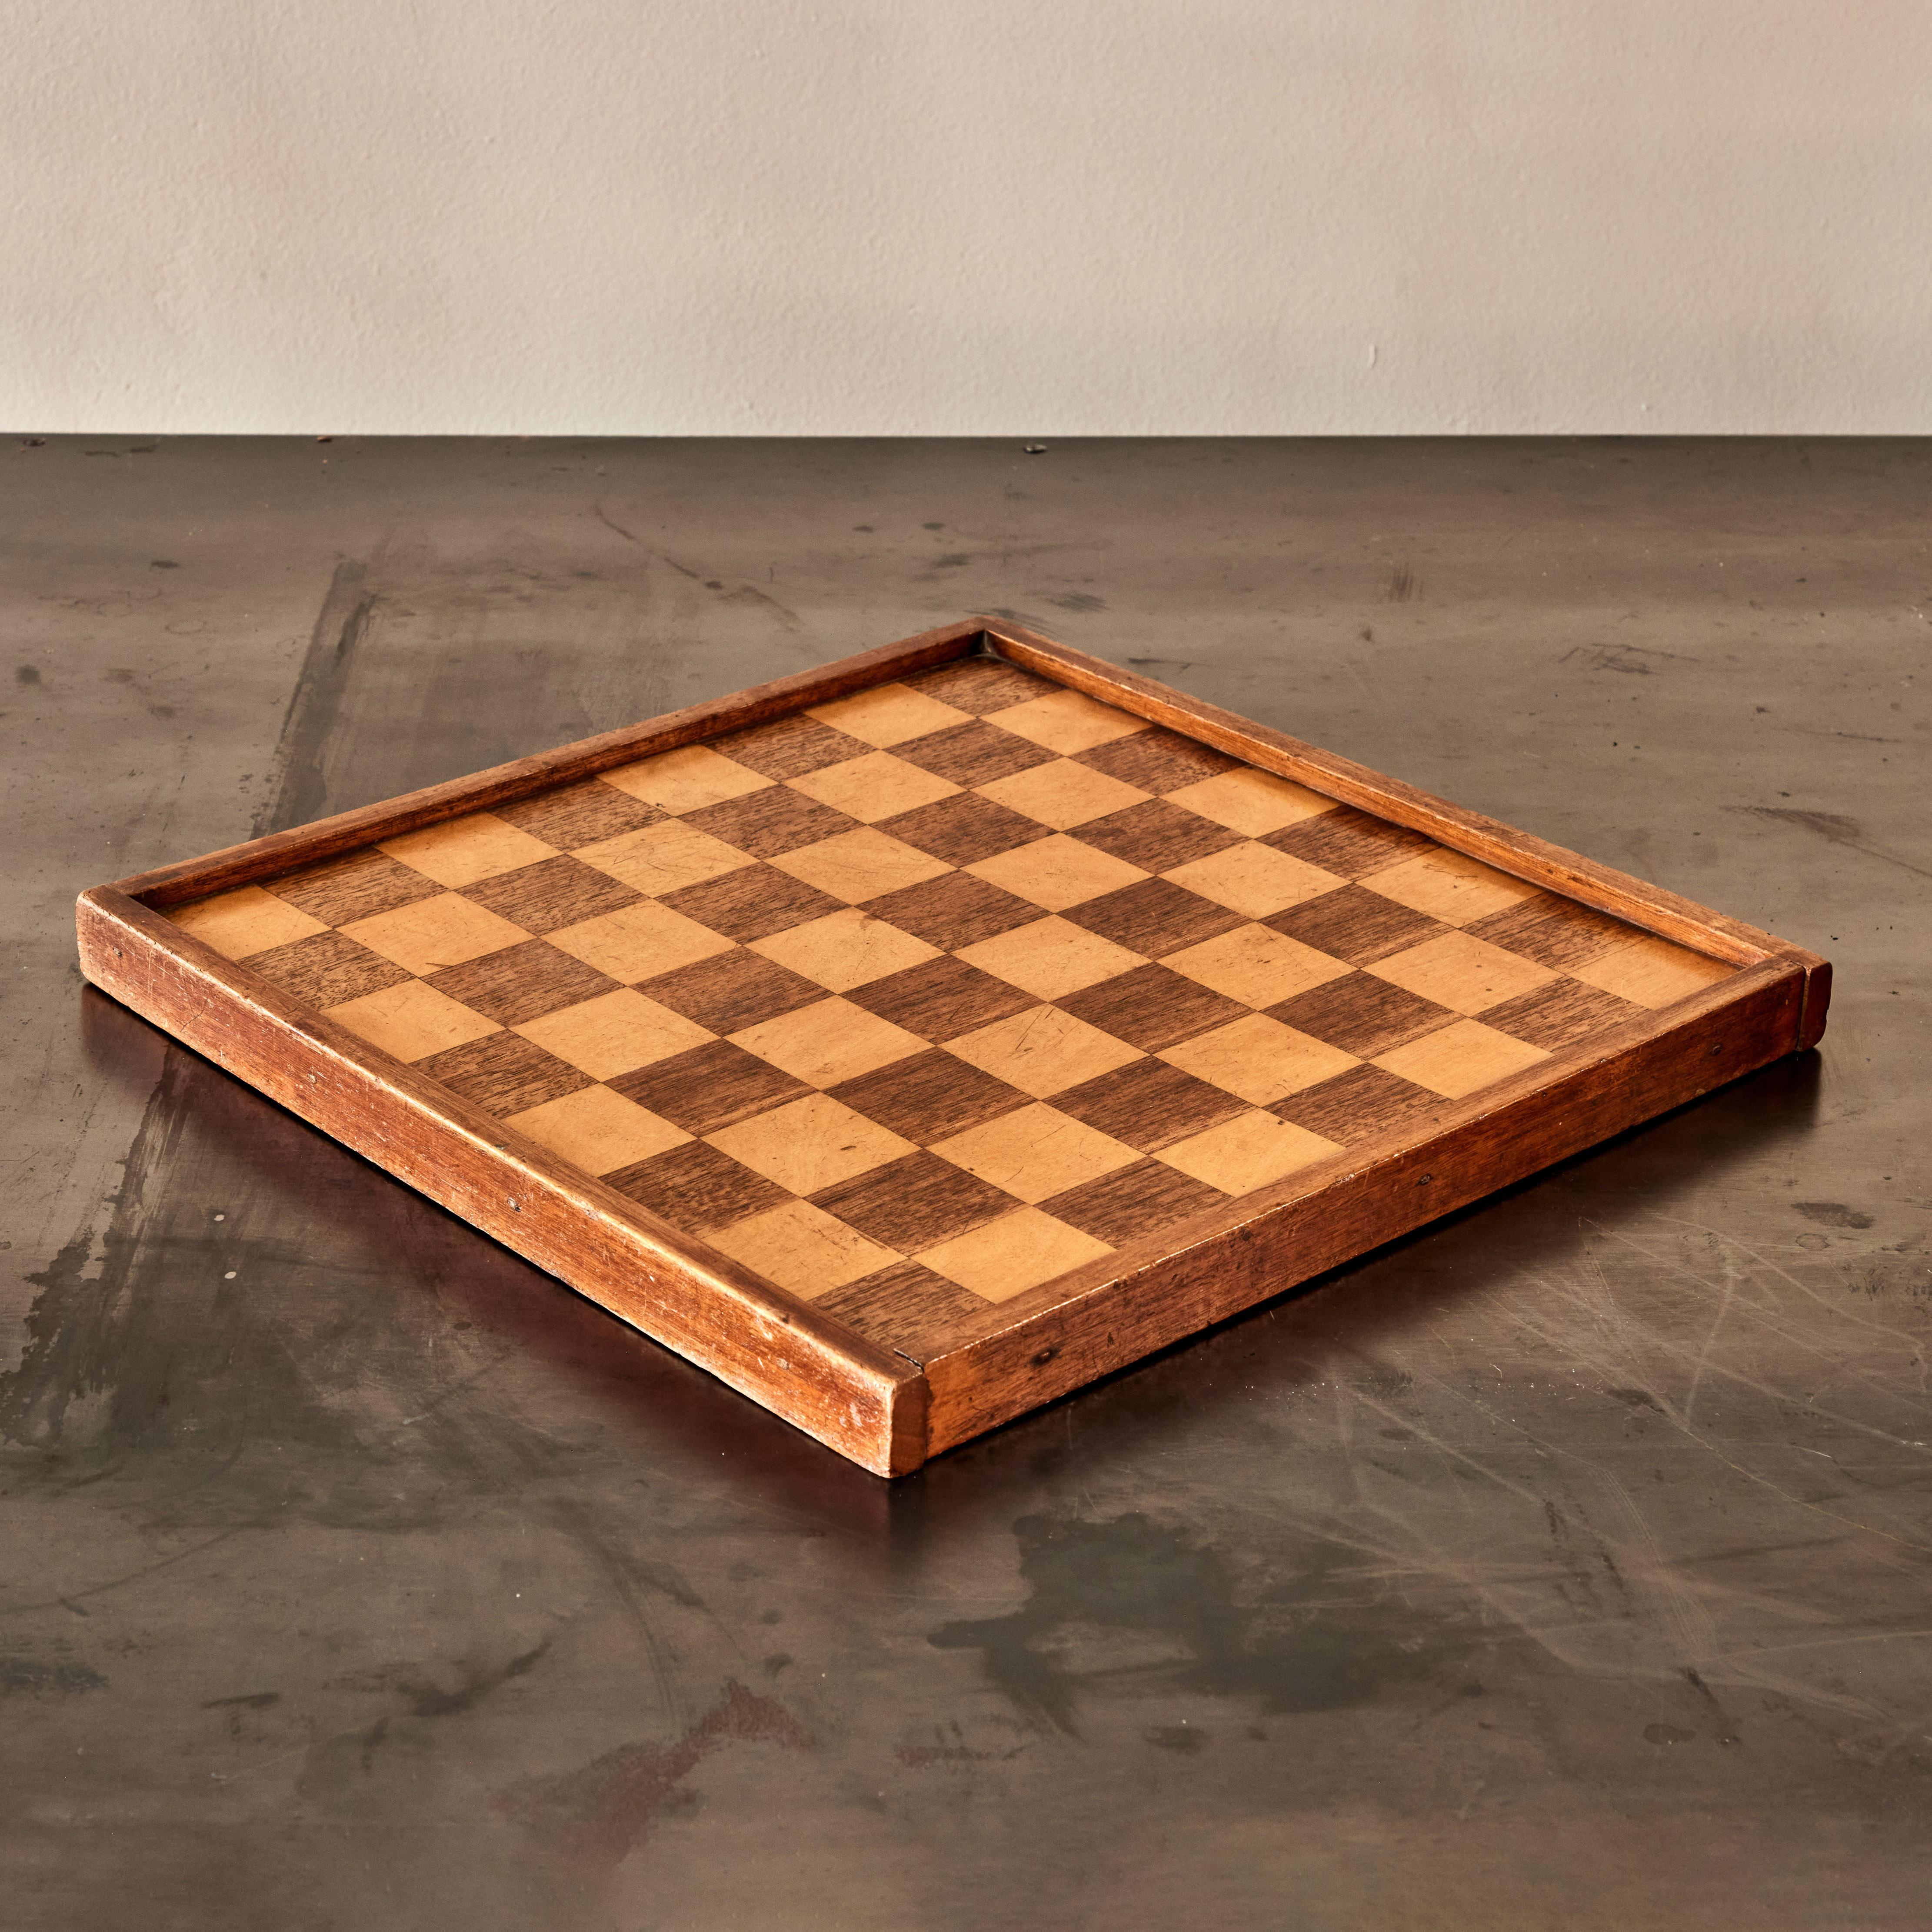 Inlaid wooden checkerboard from England, dating to the early 19th-century. An attractively patinated piece, it conceals an additional solo noble board on its underside. An excellent example of the elegance and functionality which define English